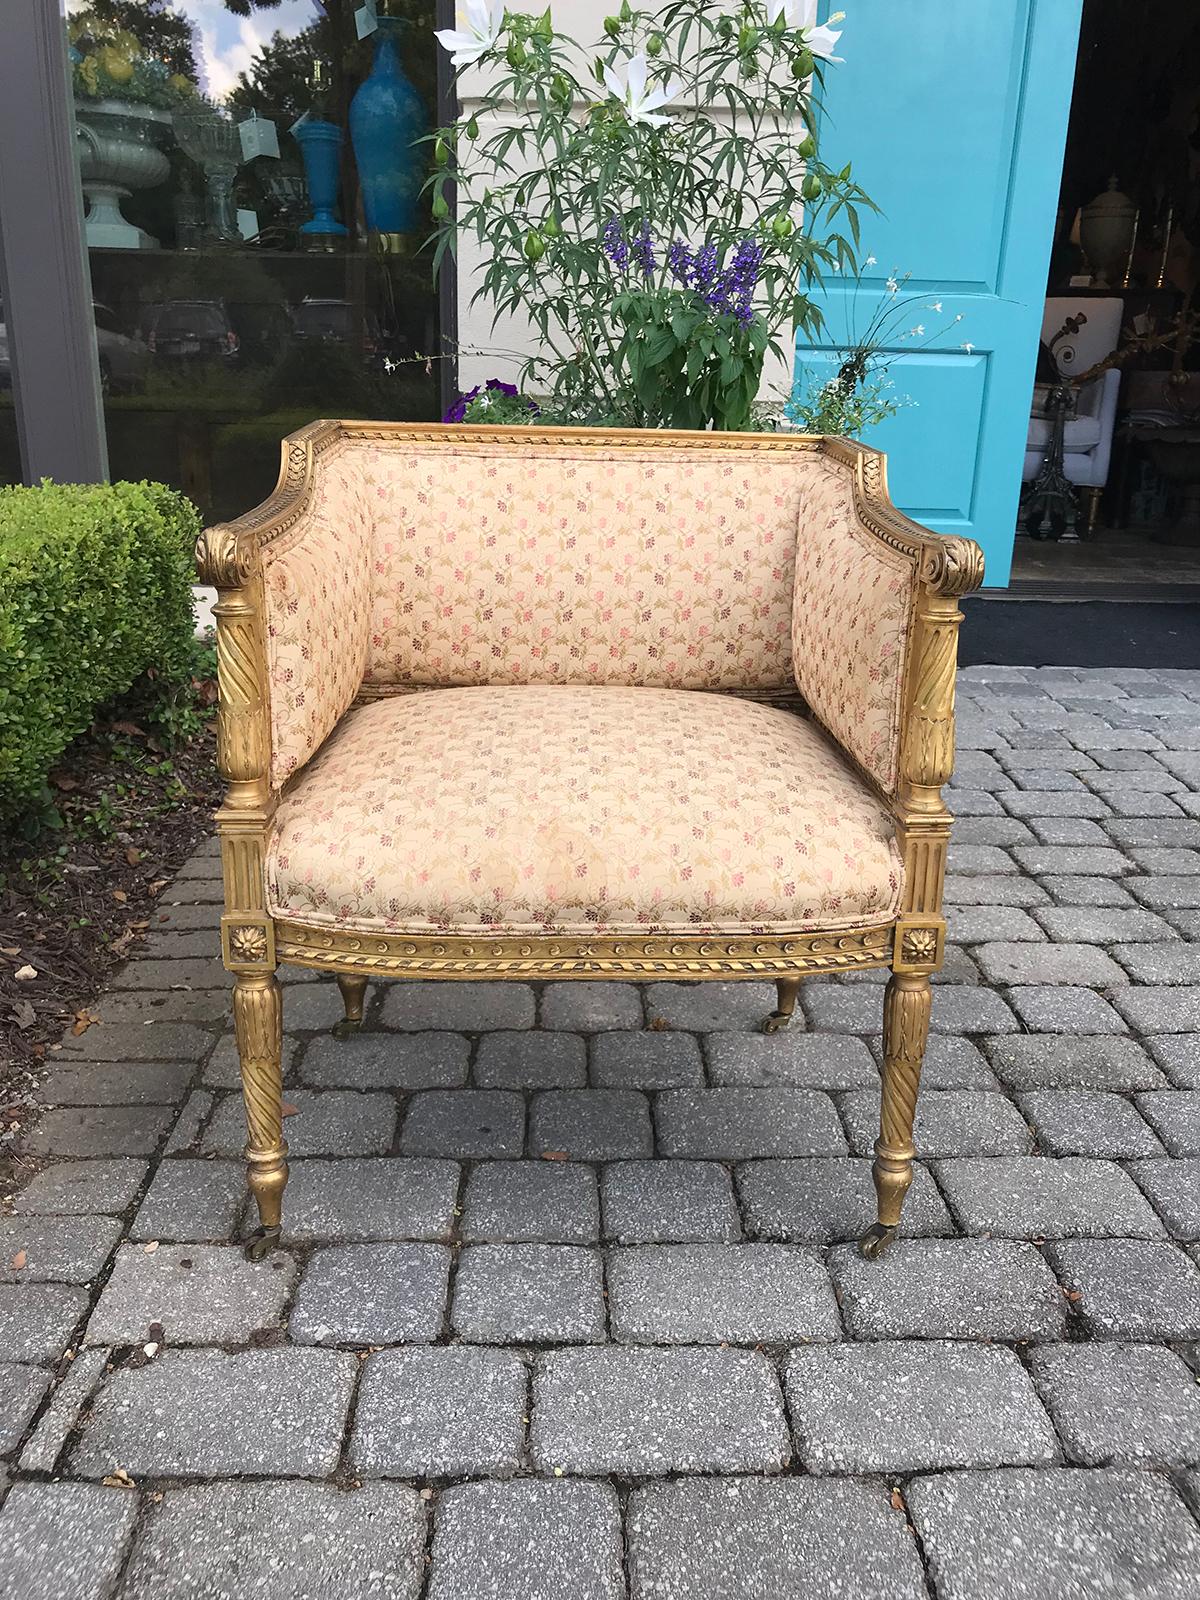 Late 19th-early century 20th Louis XVI small chair.